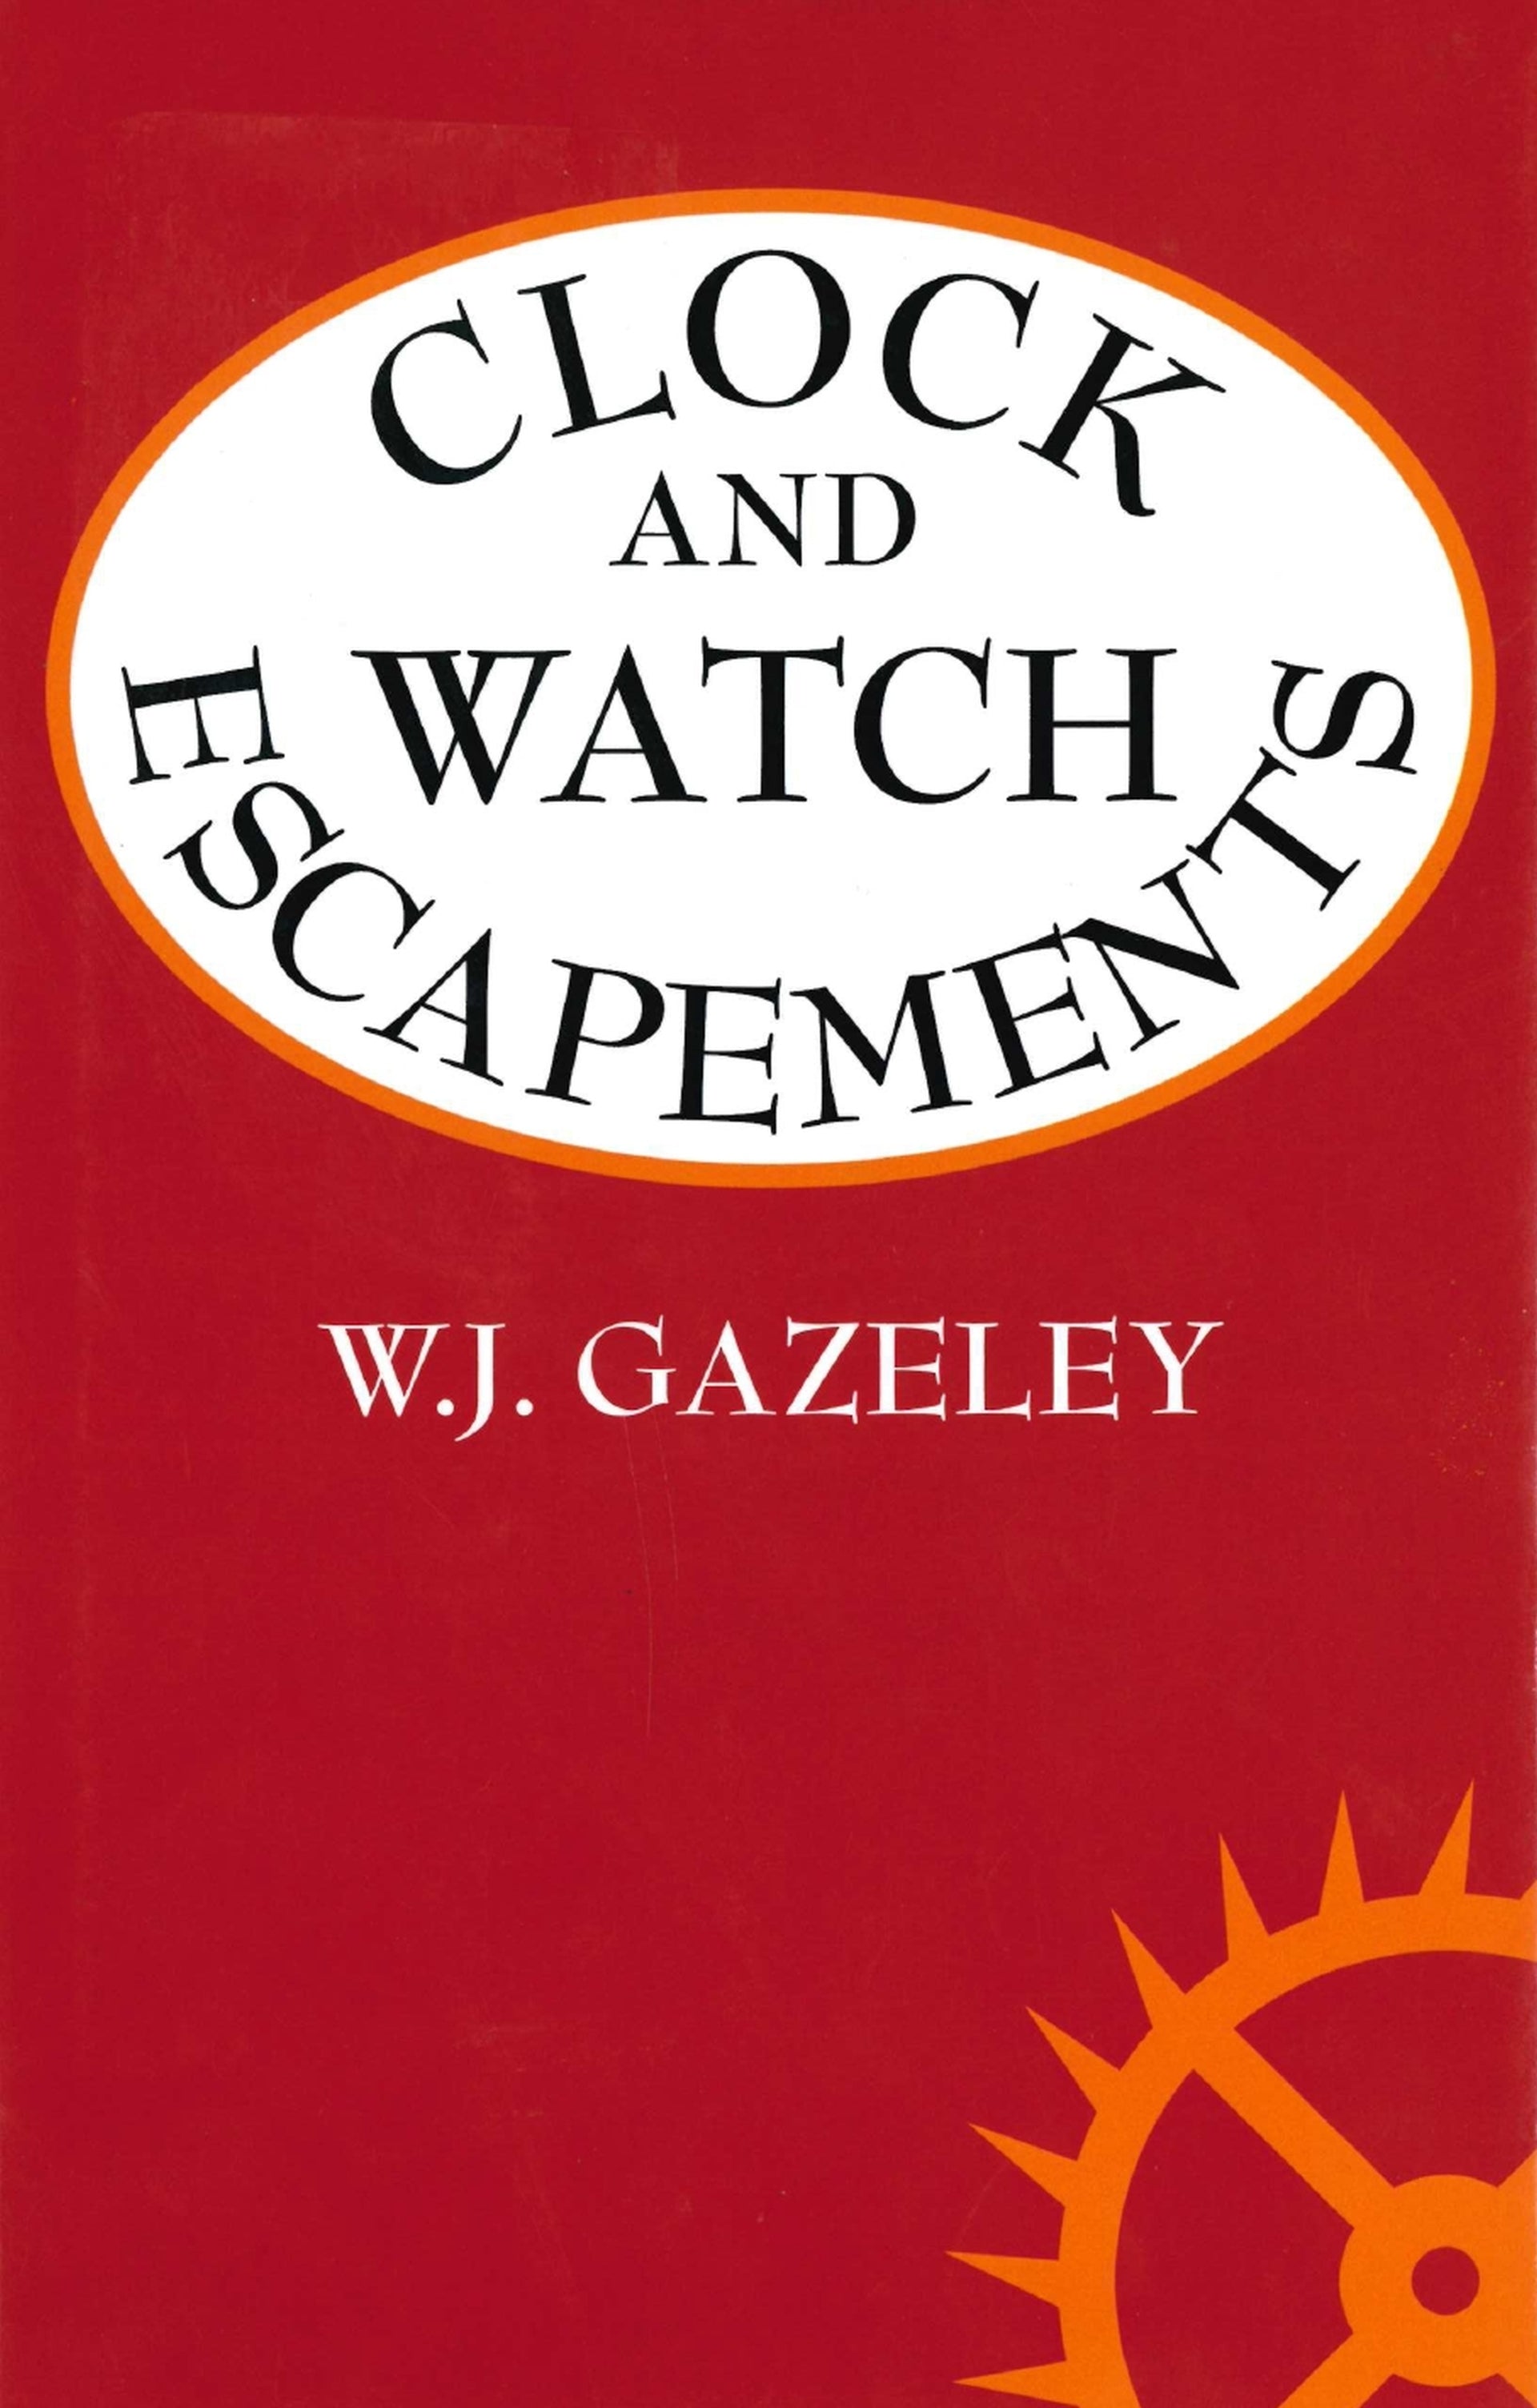 Clock and Watch Escapements